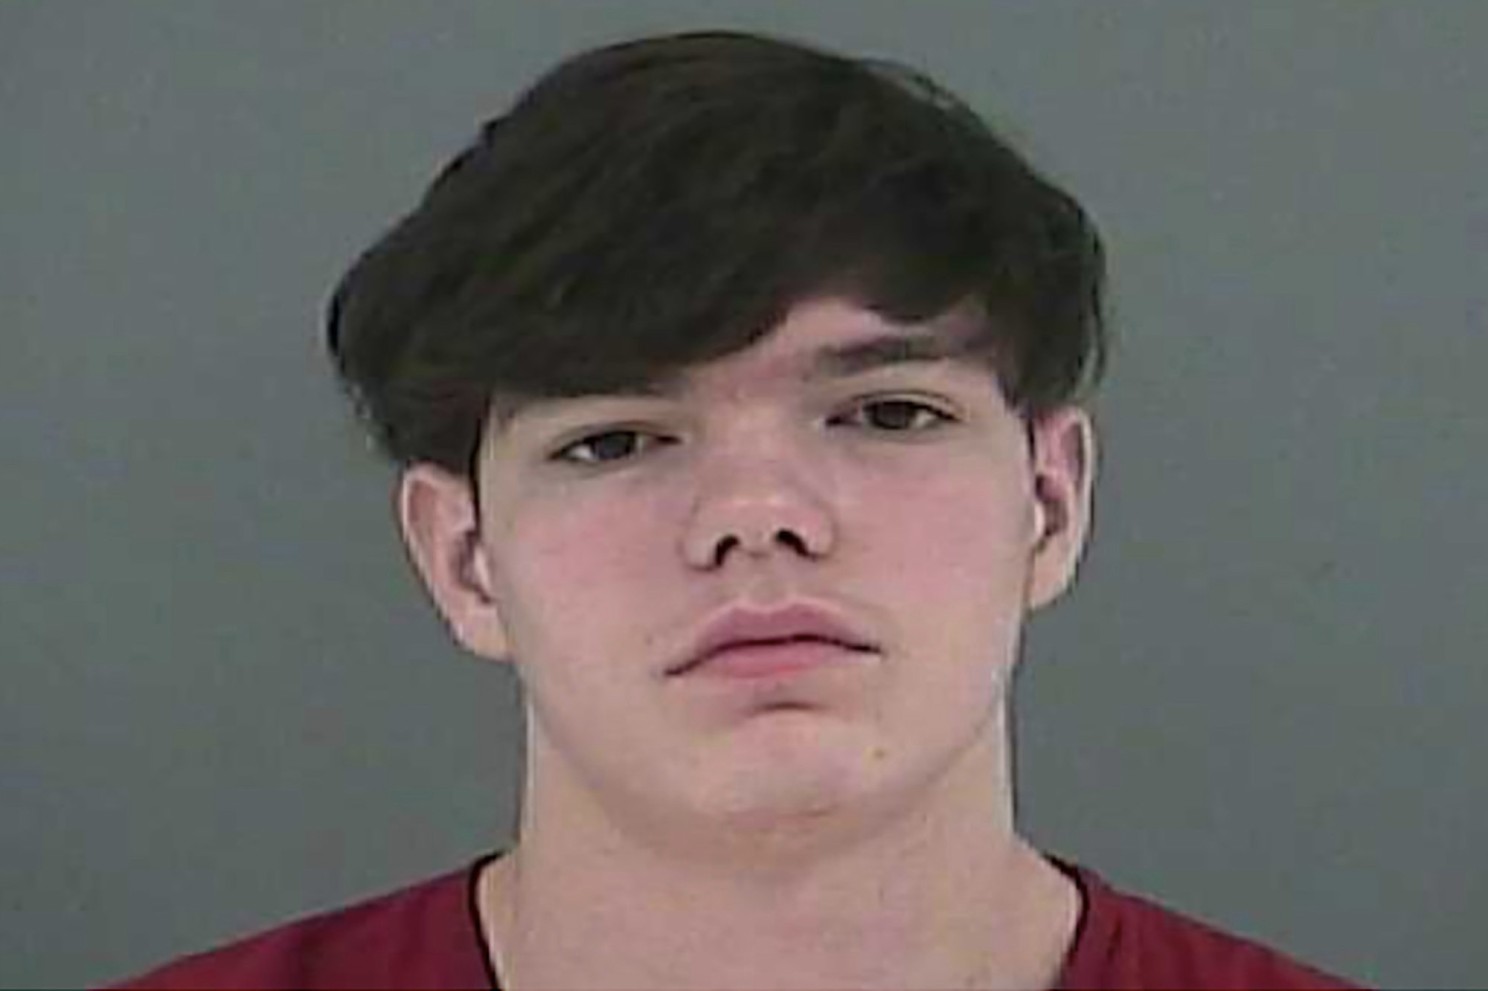 A Tennessee teenager accused of shooting his sleeping mother in the head allegedly fired the fatal shot because she confiscated his cell phone.